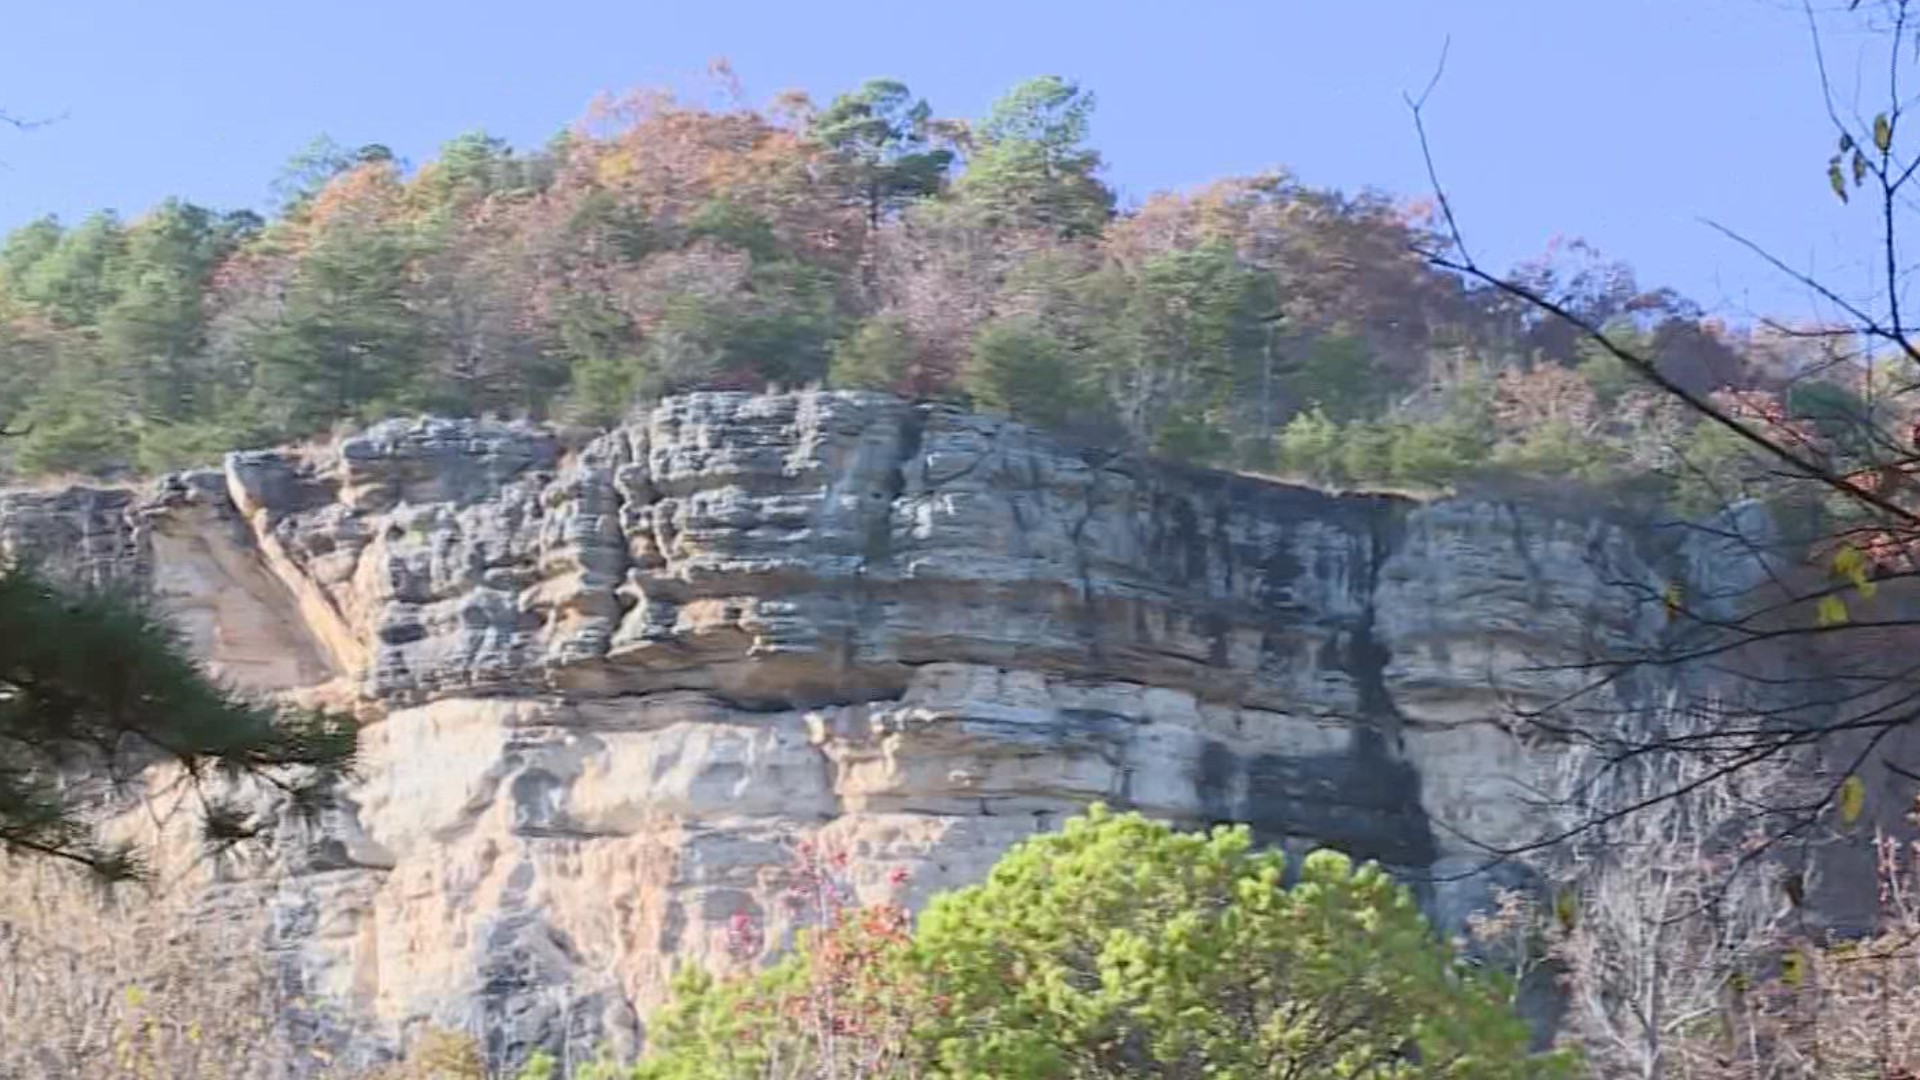 A Bentonville man who led hikes on the Buffalo National River without a permit has been convicted after a man died on one of his guided hikes.